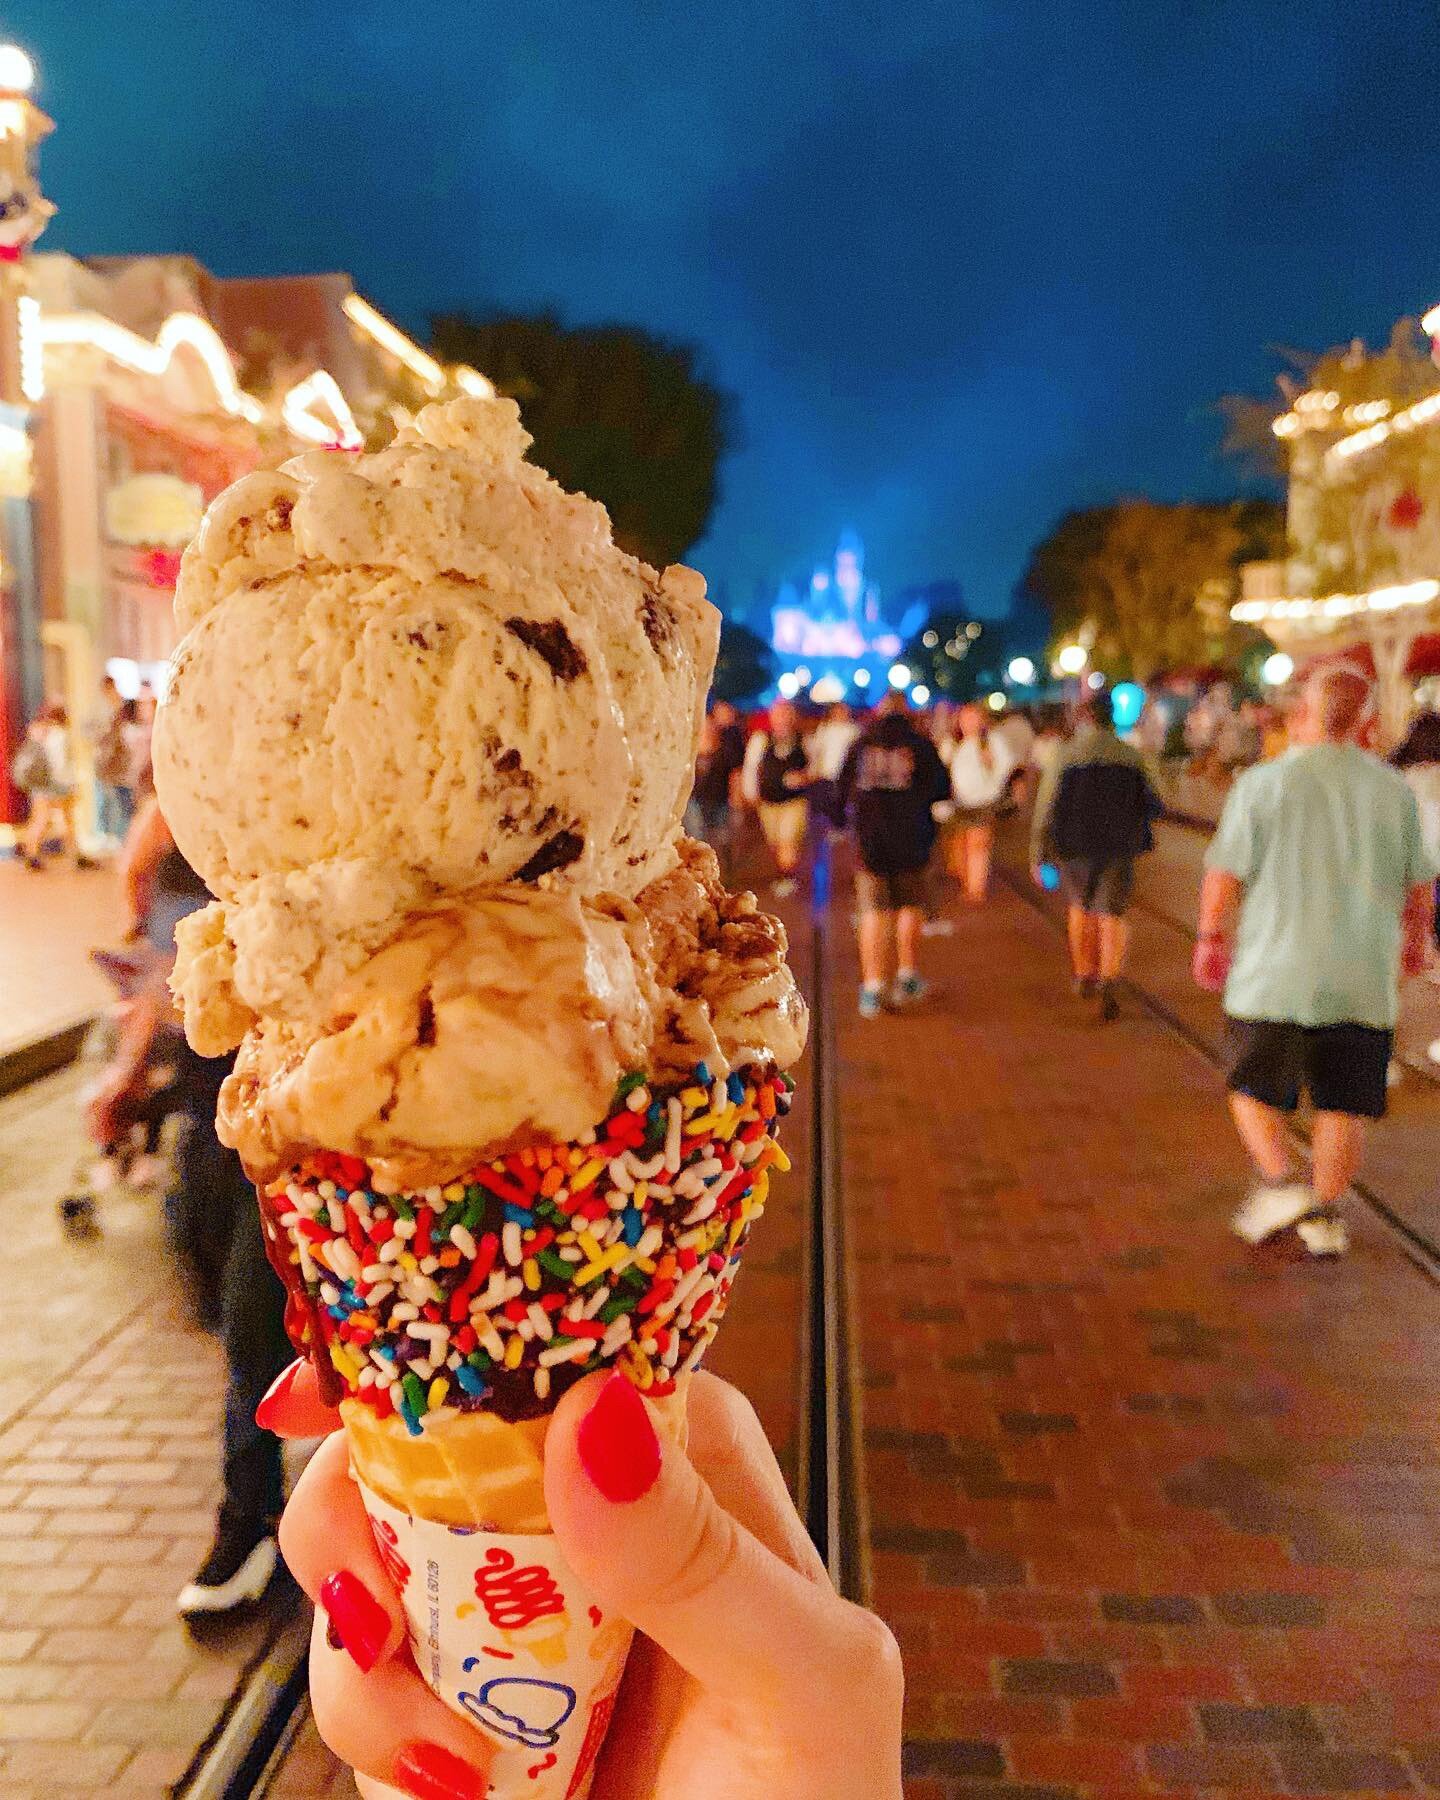 The Best Disneyland Ice Cream (Don't Miss Out!) - Travels with Erica